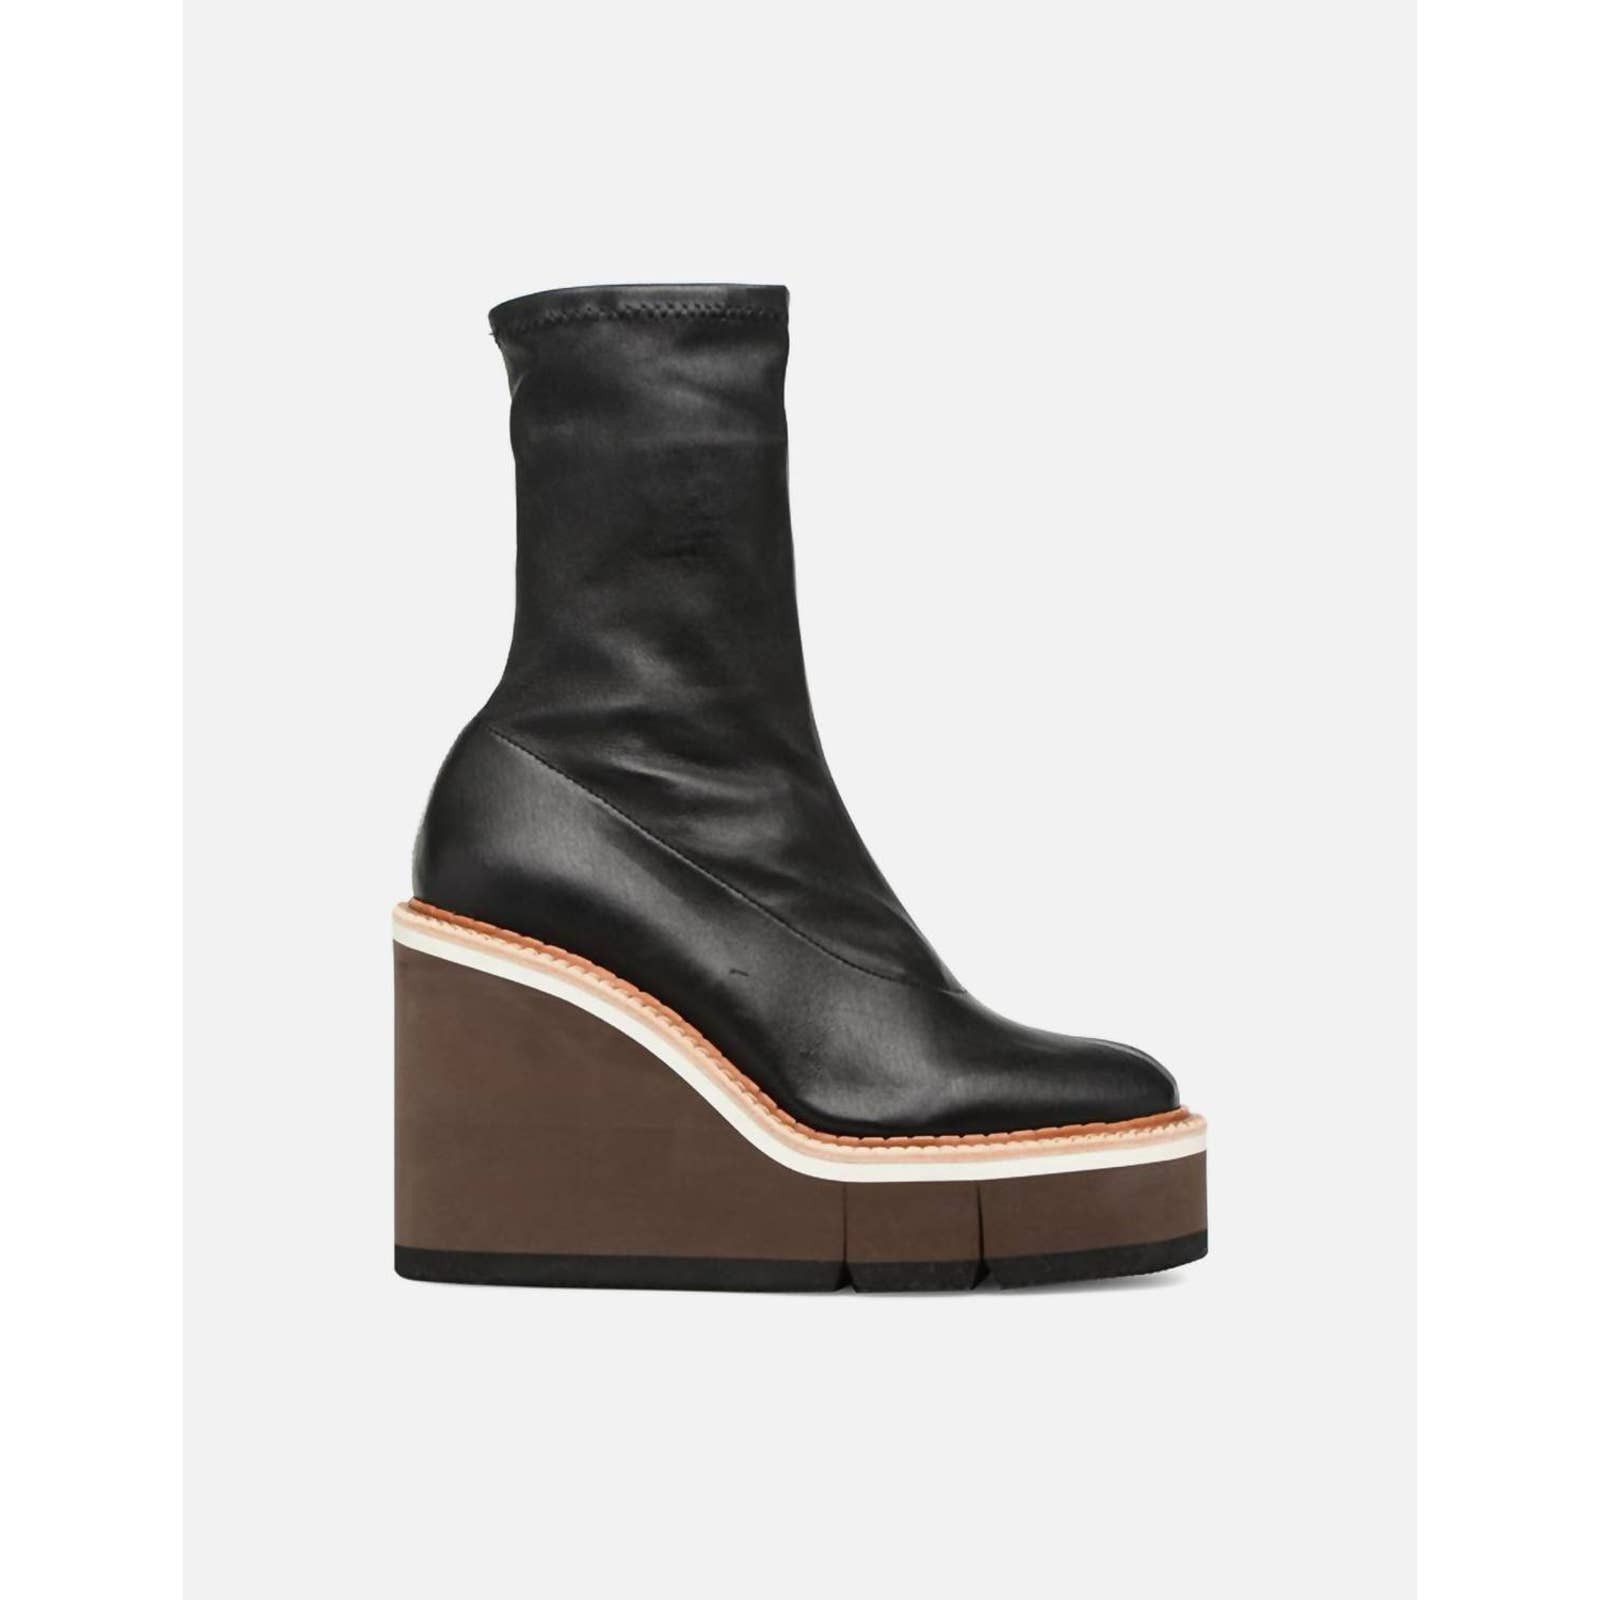 Robert Clergerie Britt Stretch Leather Wedge Boot In Black | Grailed